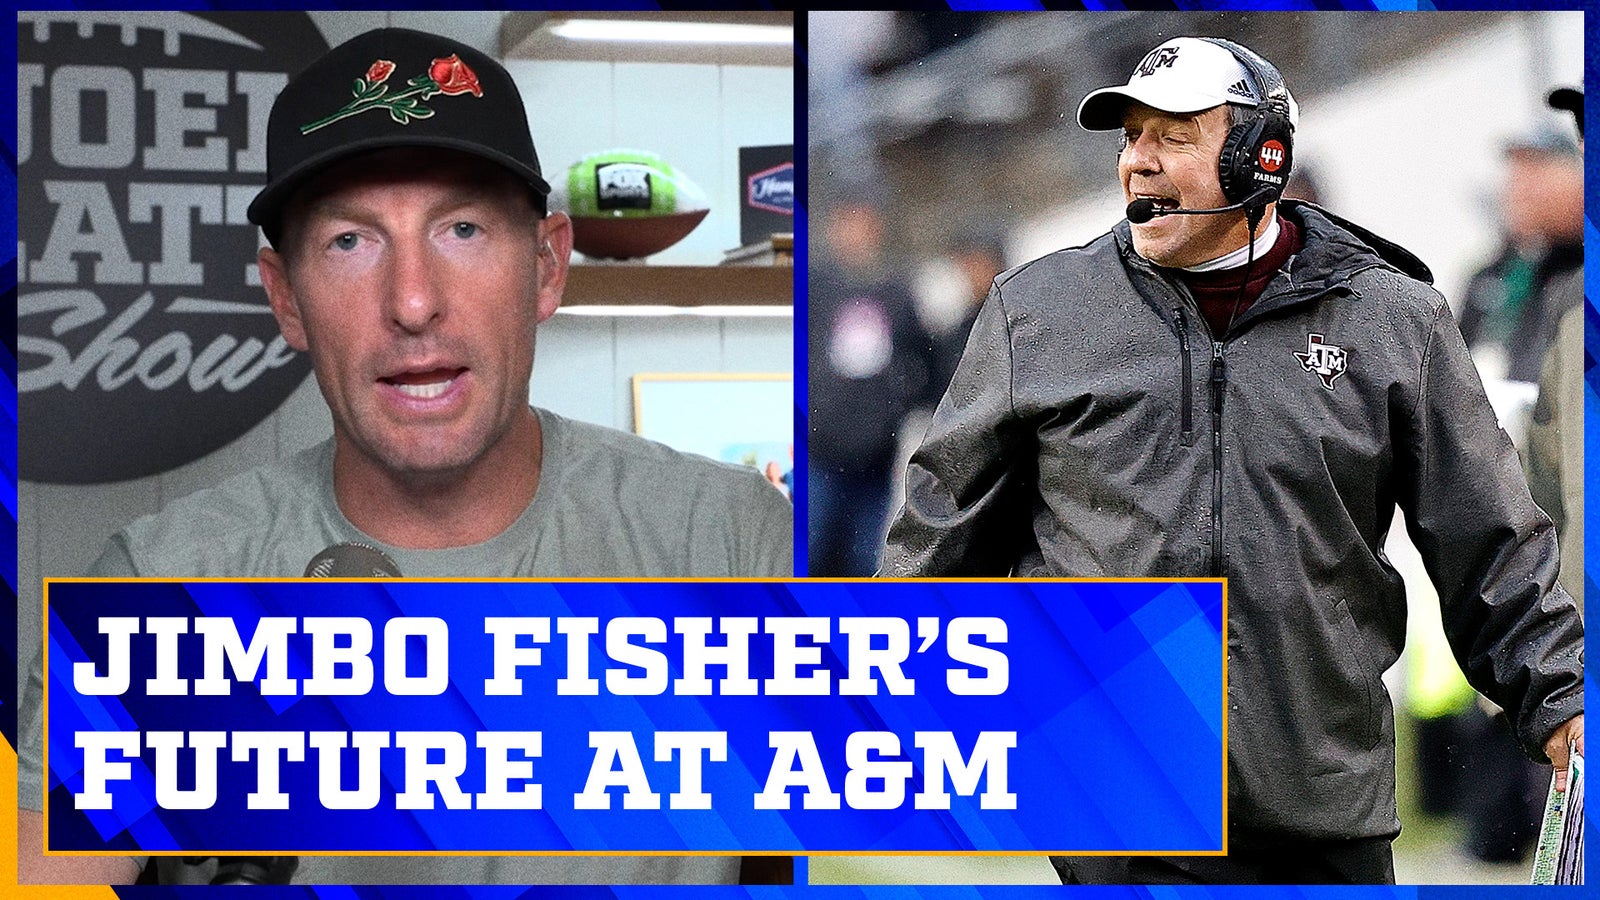 What is the future for Jimbo Fisher at Texas A&M?